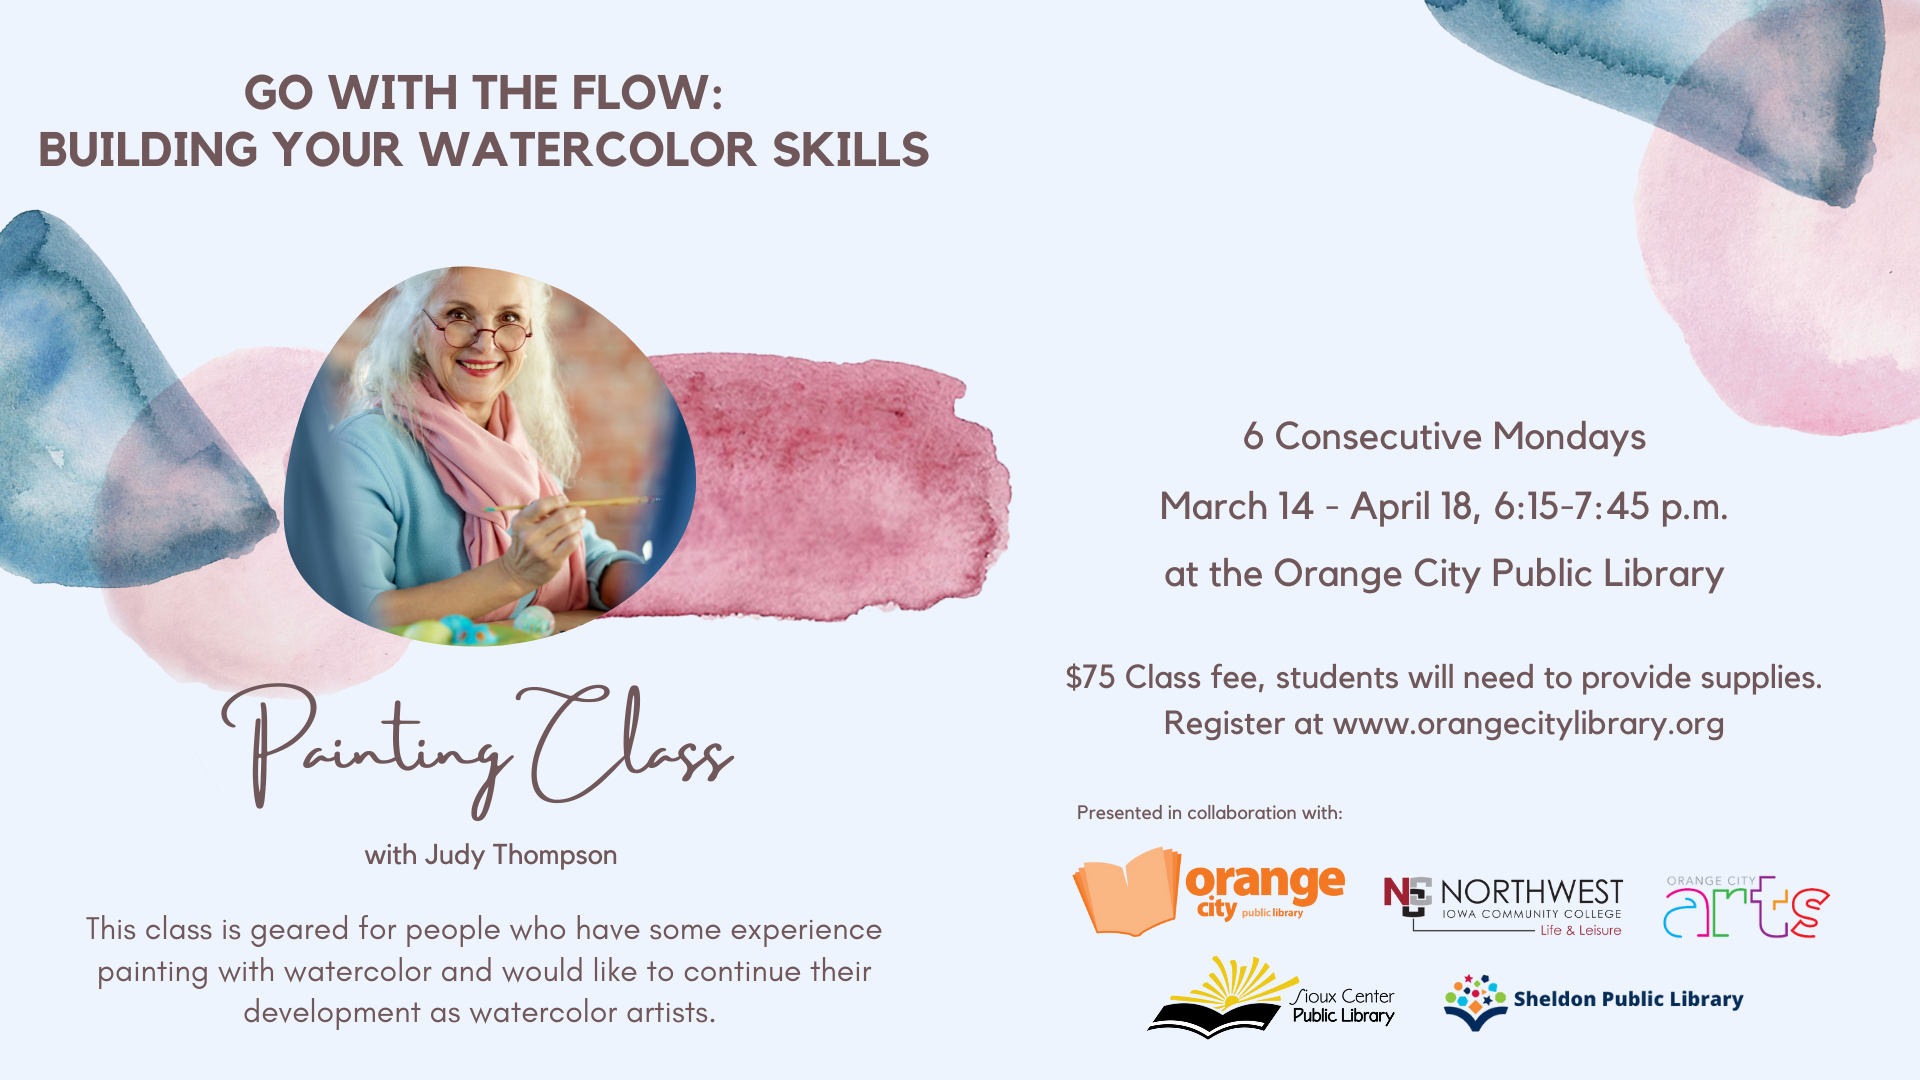 Go with the flow water color